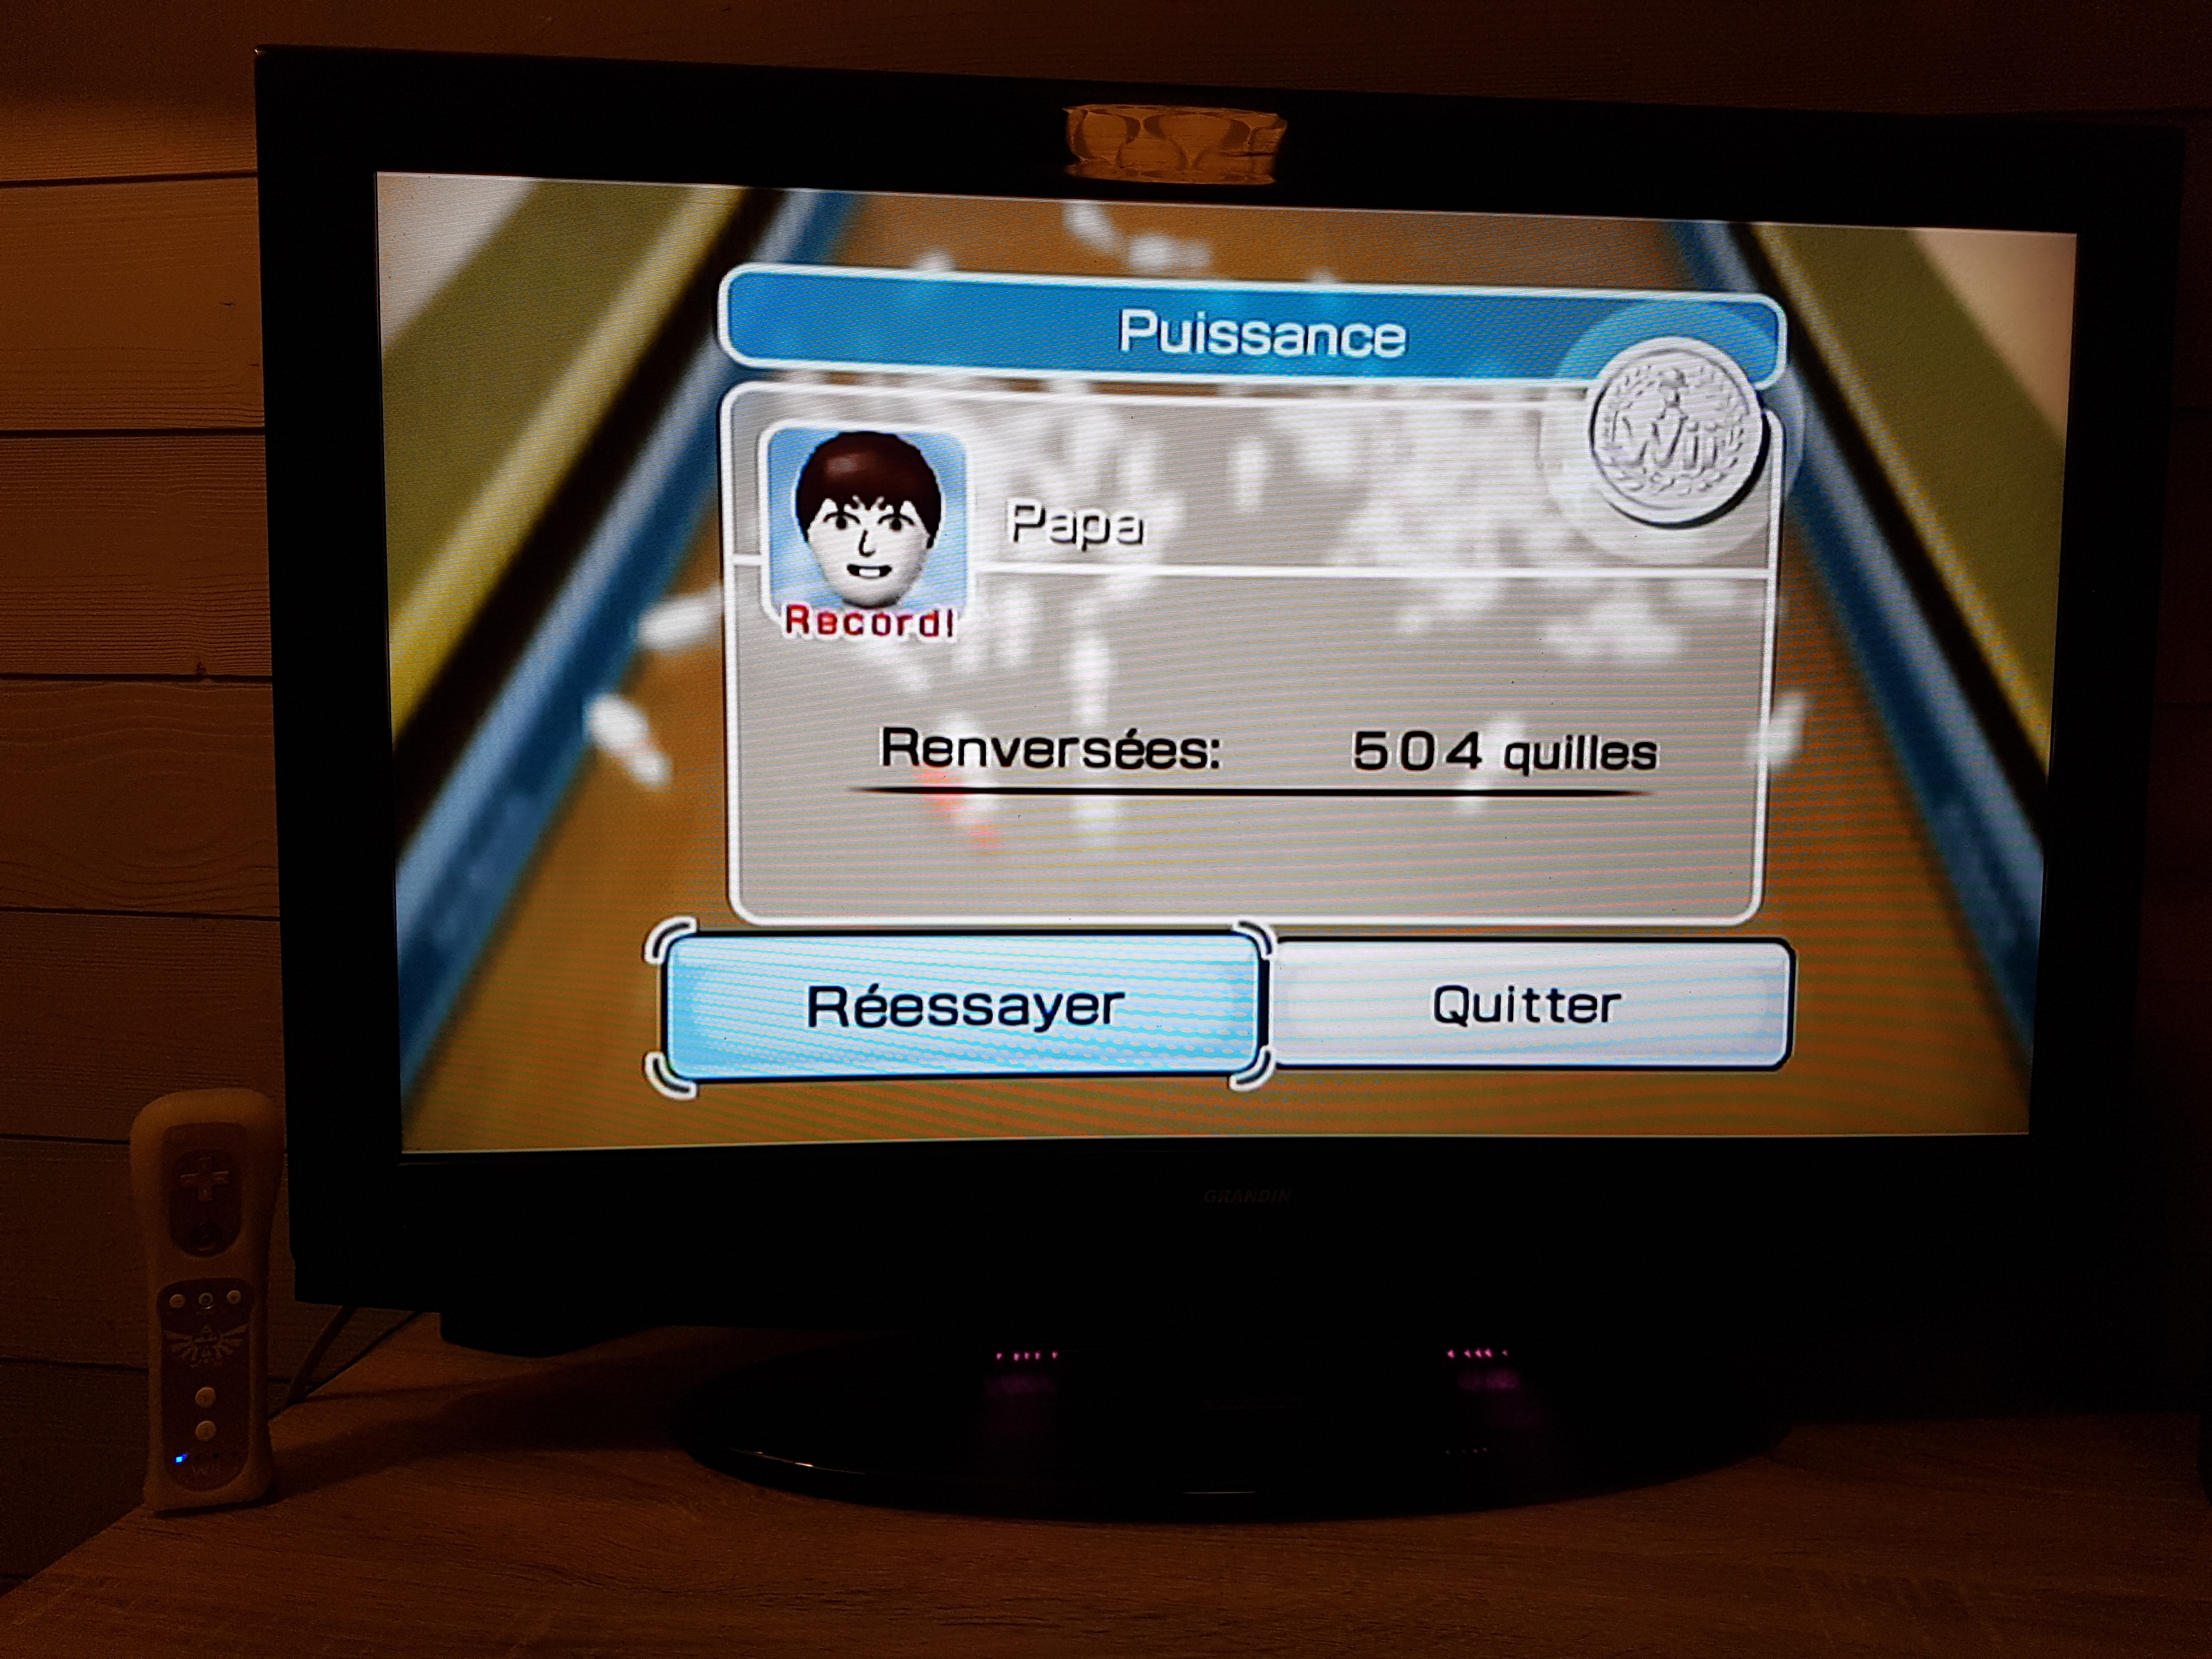 Wii Sports: Bowling [Power Throws] 504 points